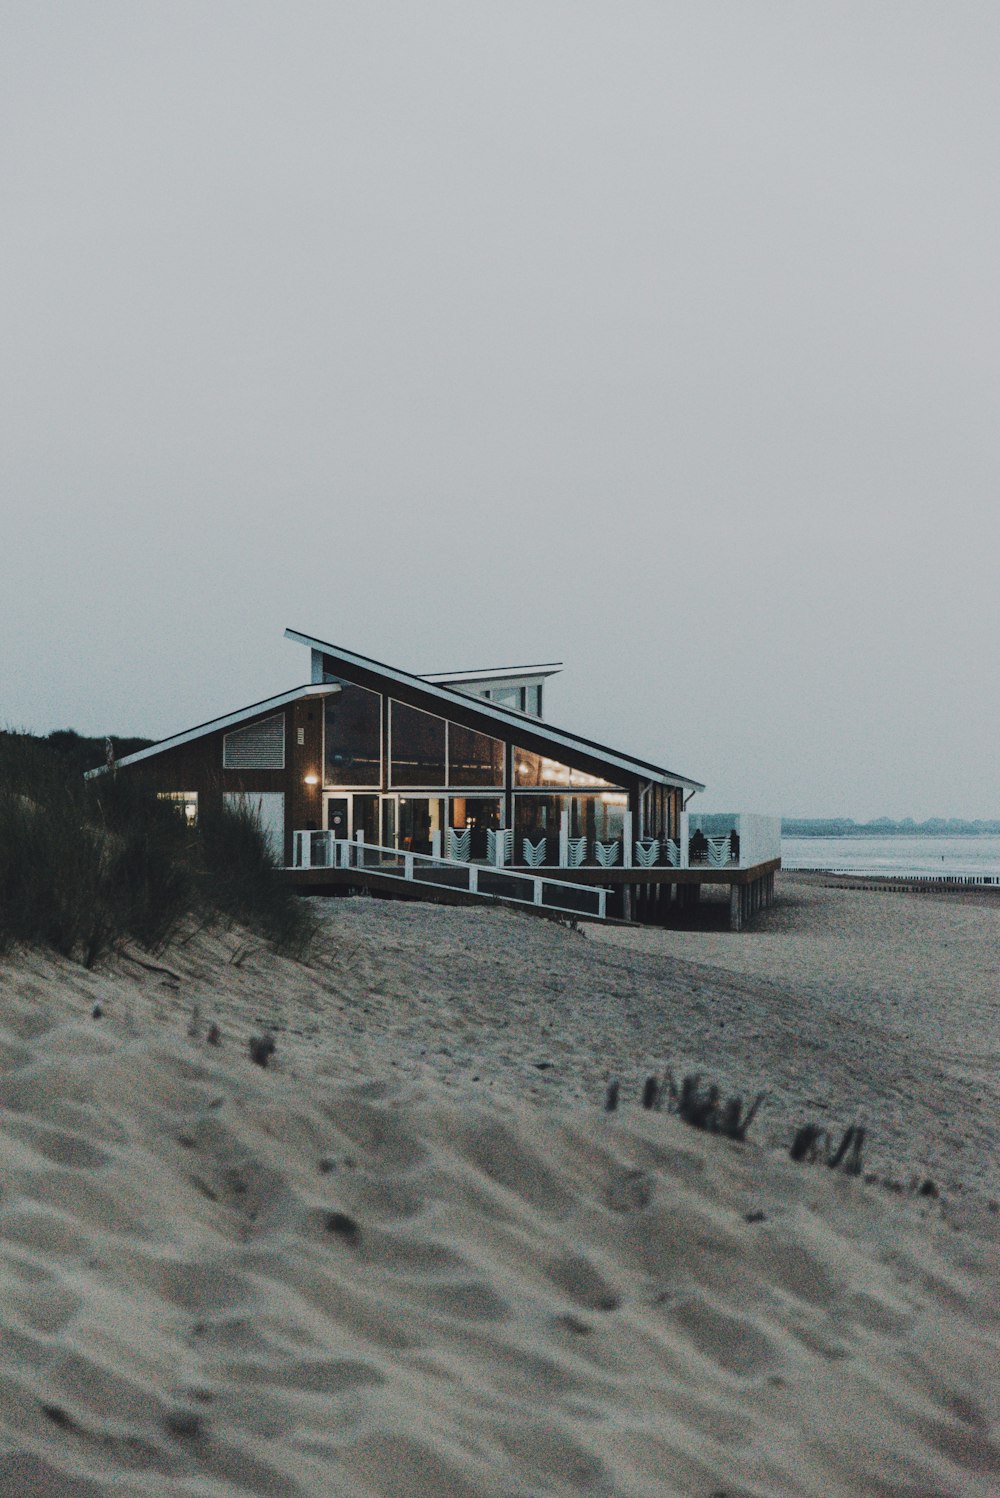 brown wooden house on beach during daytime